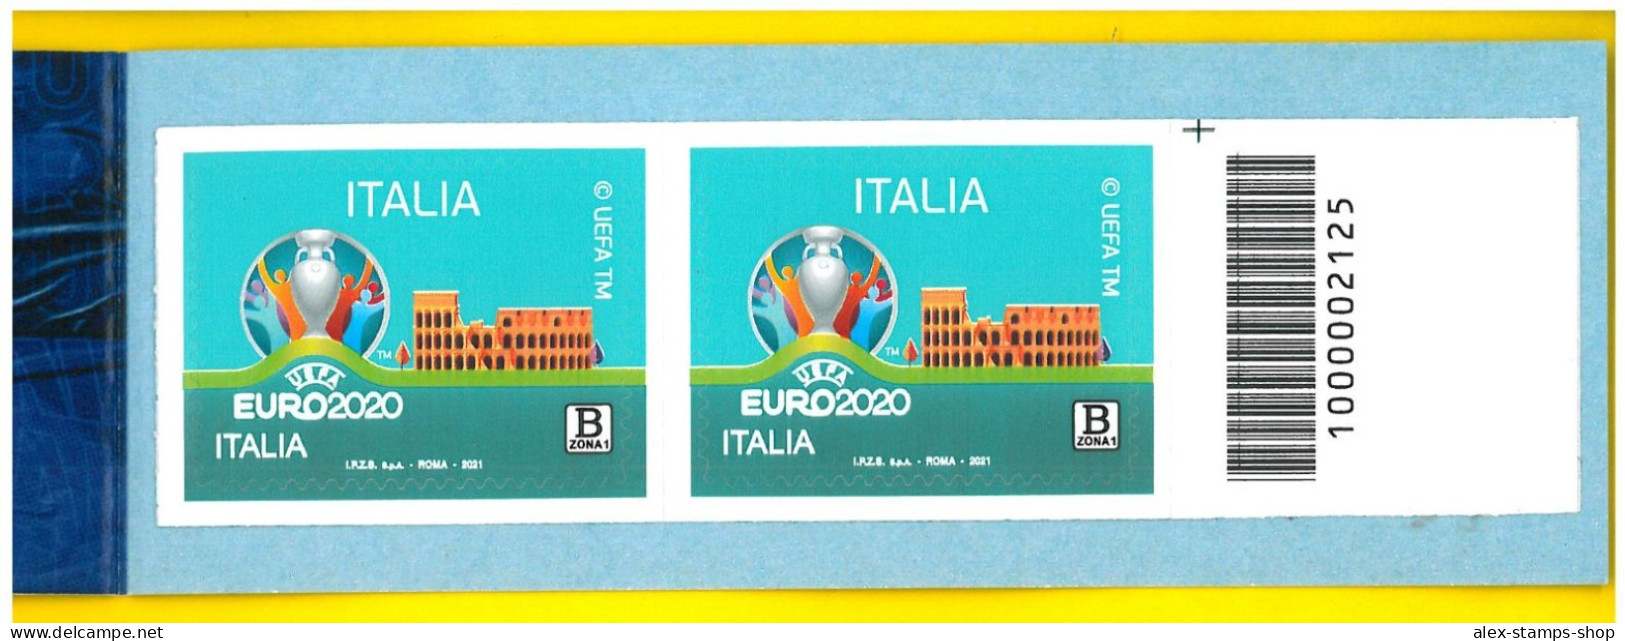 ITALIA 2021 NEW BOOKLET EUROPEAN 2020 - BARCODE NUMBER 023 - Carnets